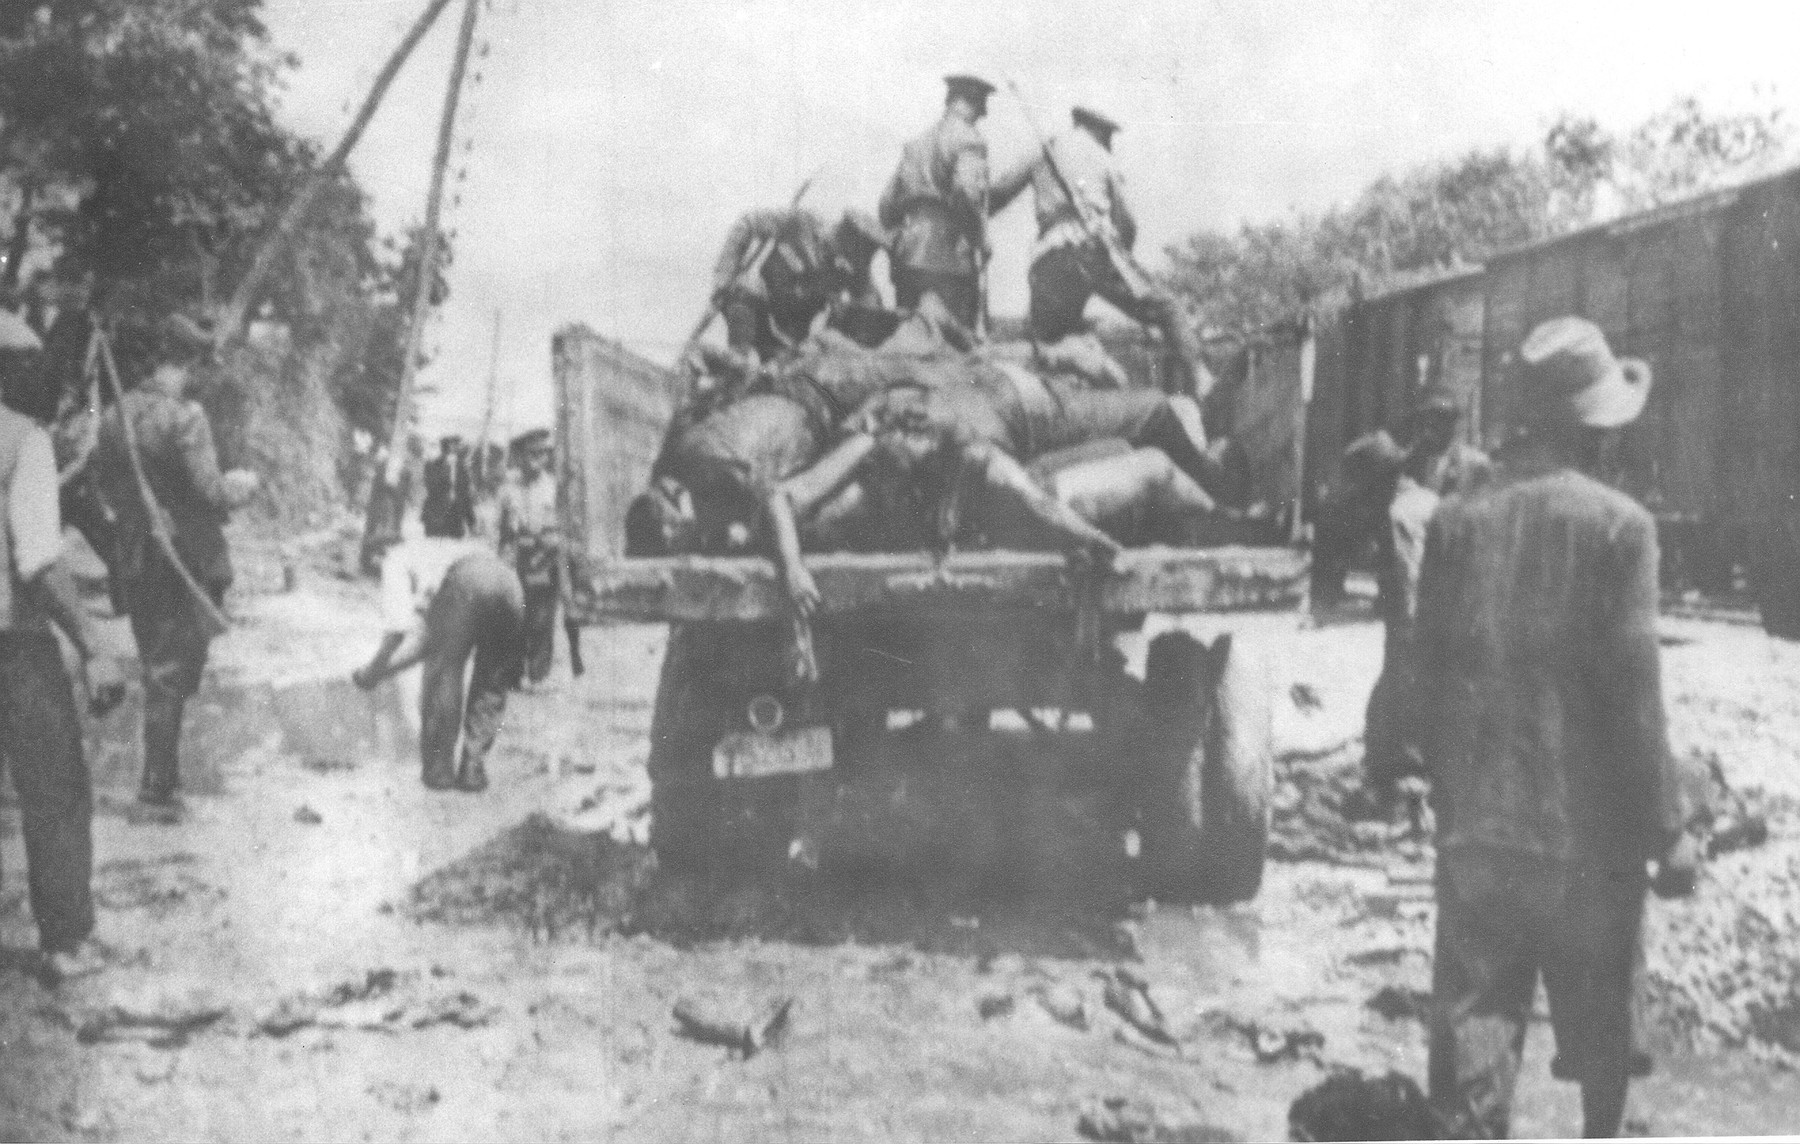 Under the supervision of Romanian guards, Romani men load the corpses of victims of the Iasi-Calarasi death onto trucks in Targu-Frumos.